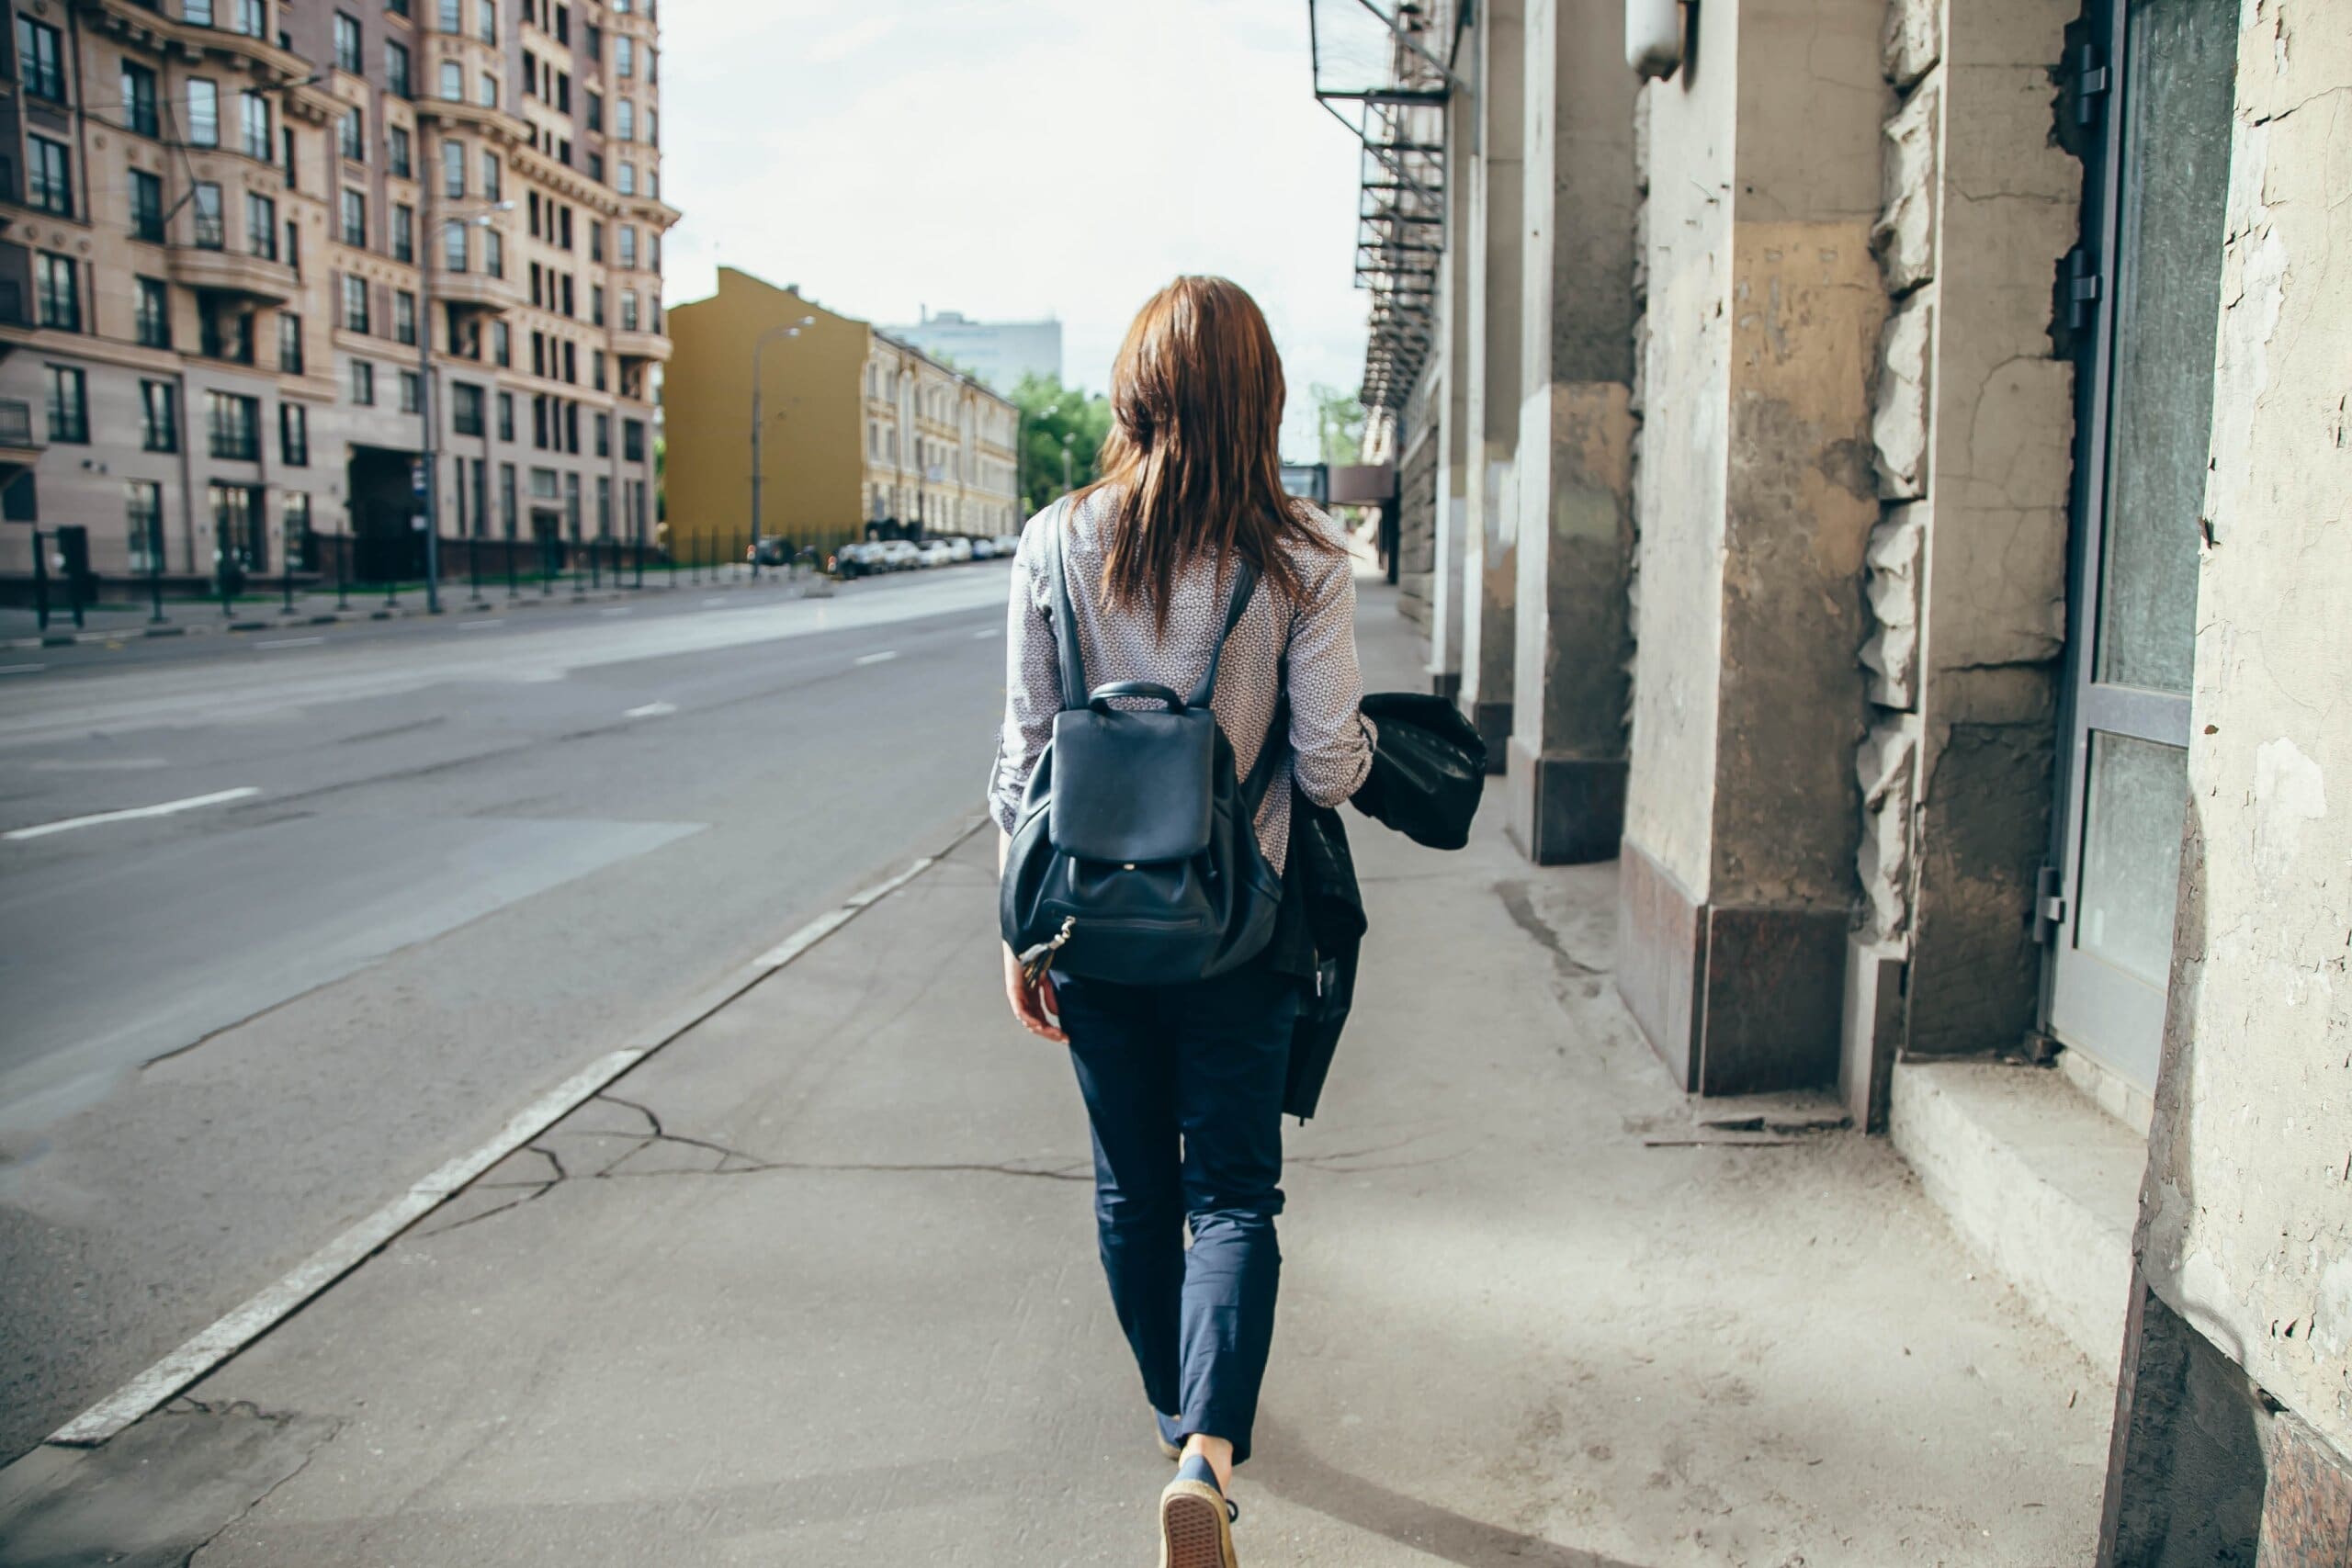 Back view of a girl with a backpack walking through a town street.